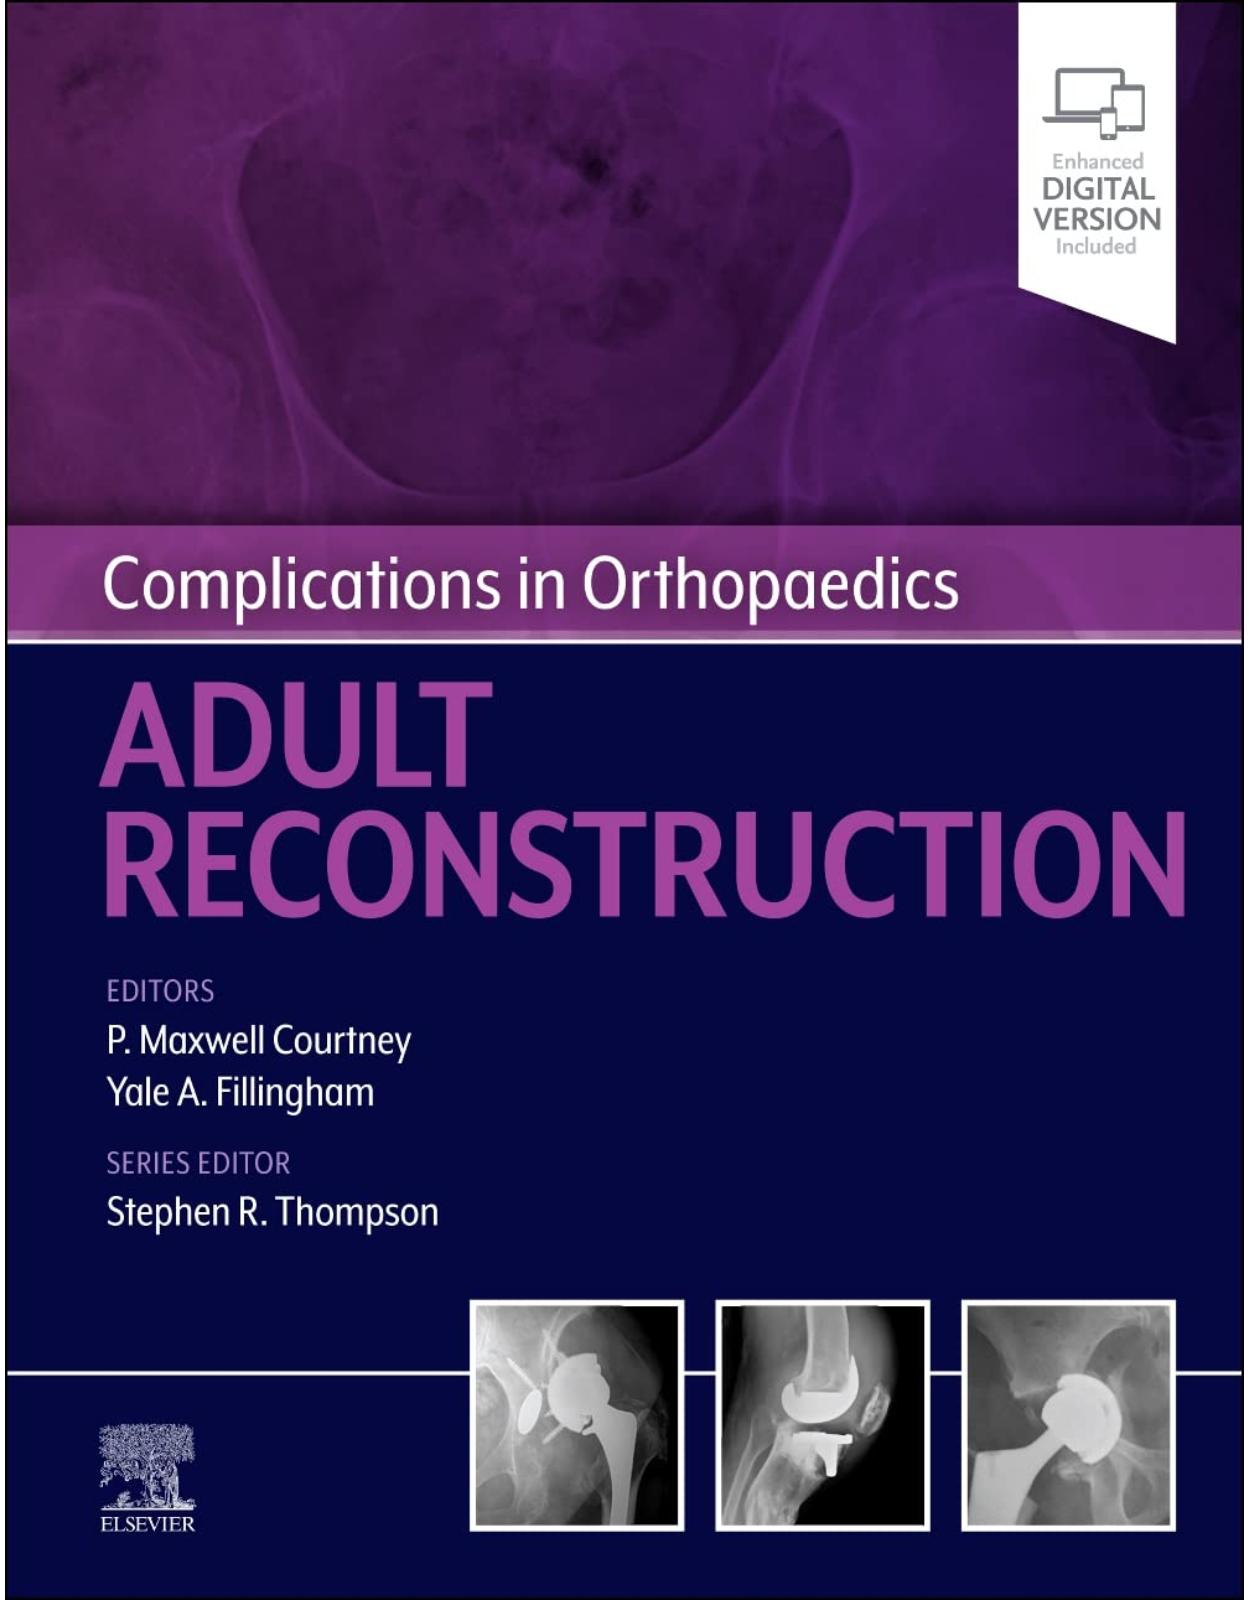 Complications in Orthopaedics: Adult Reconstruction